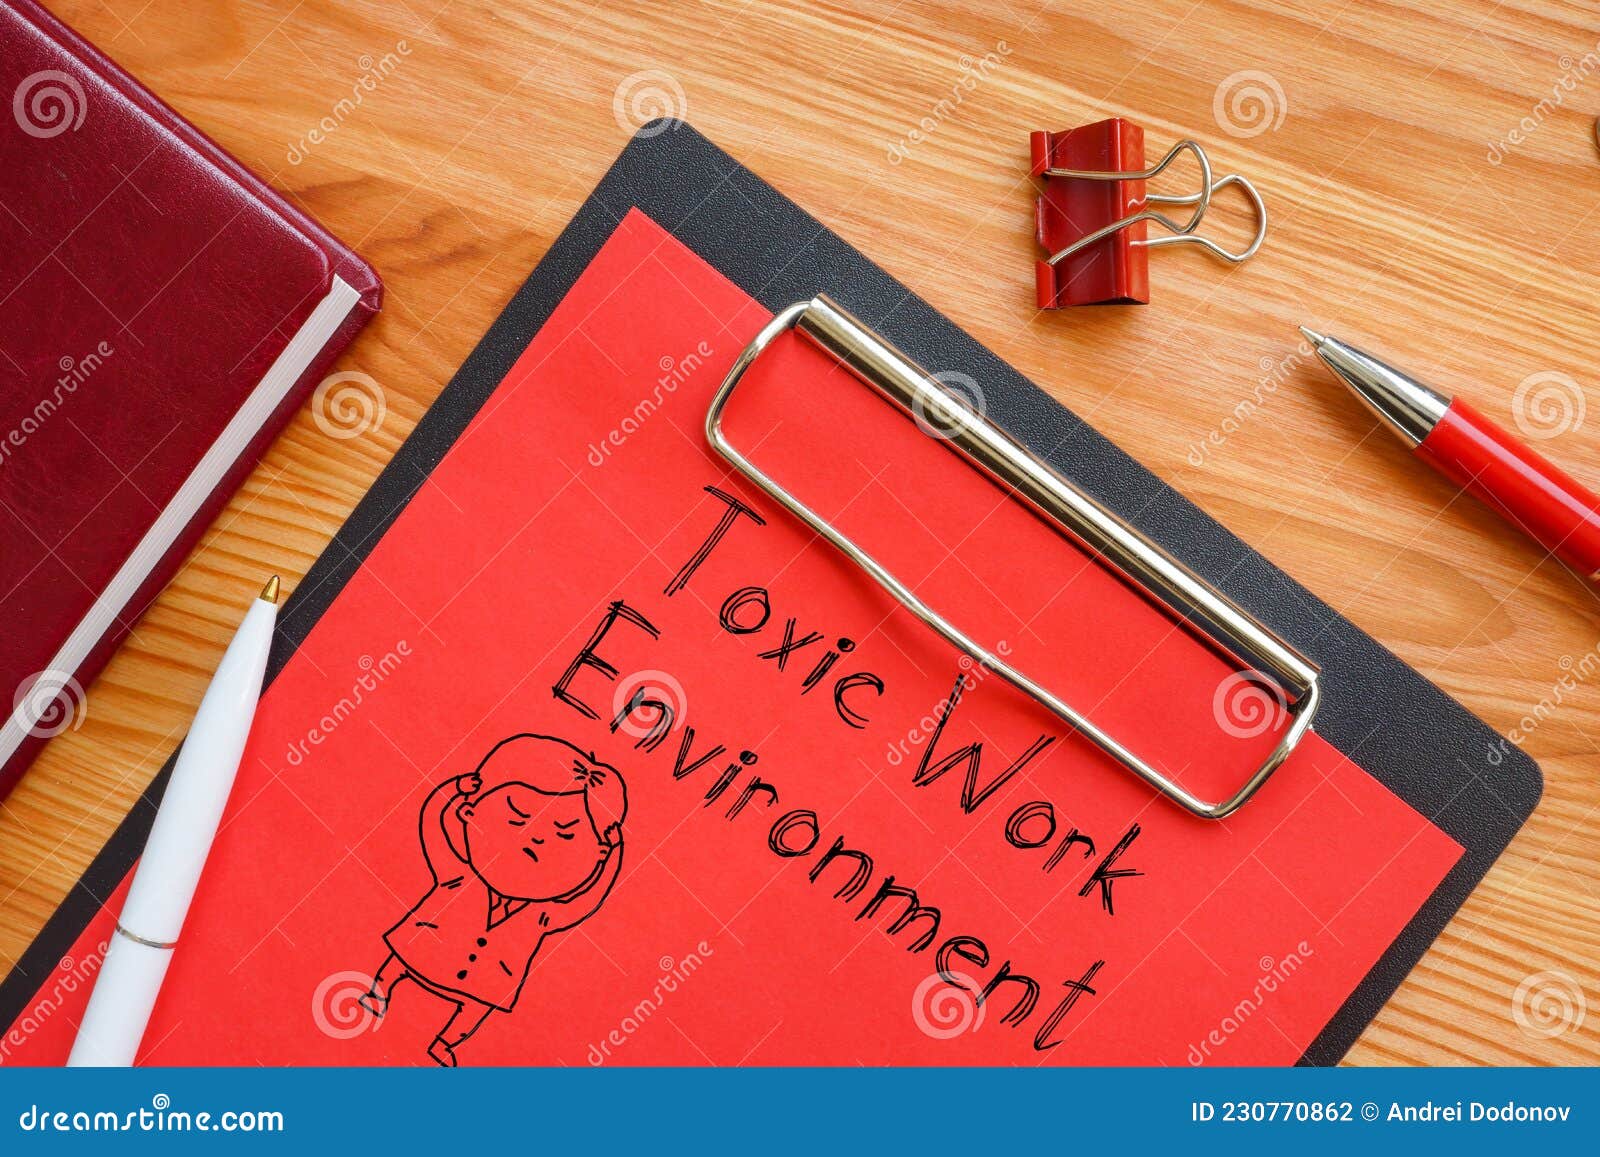 toxic work environment is shown on the business photo using the text